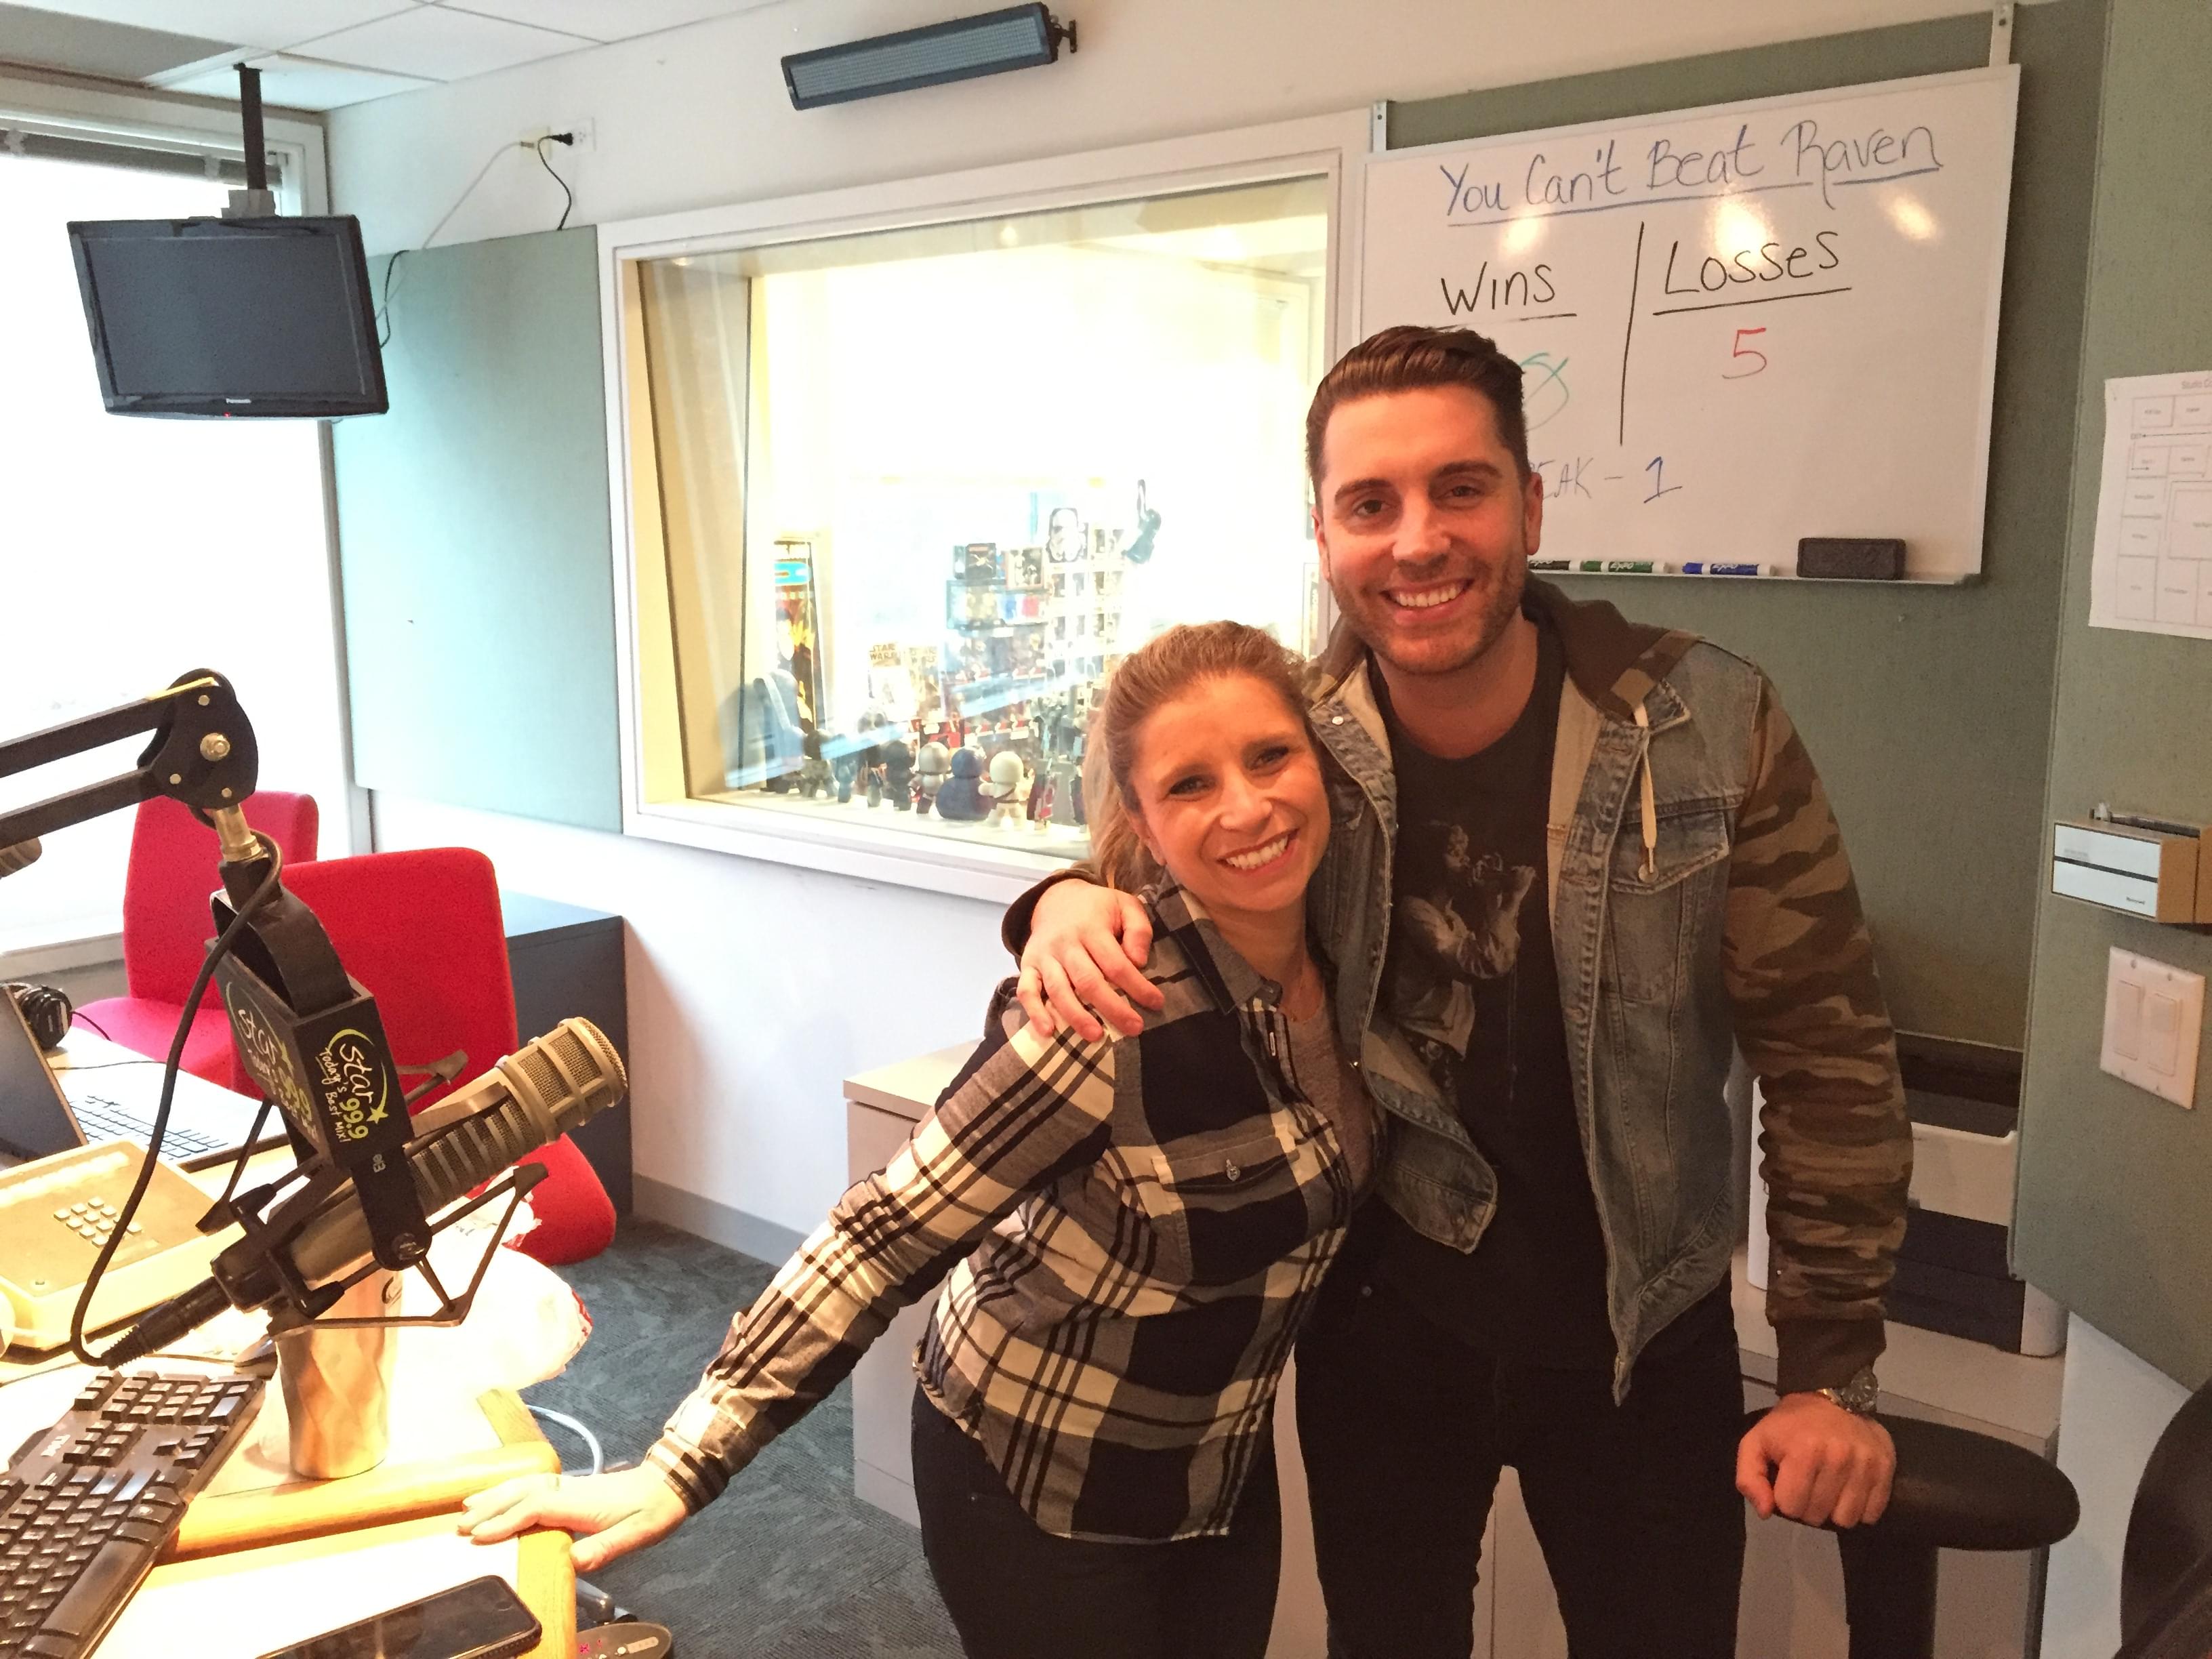 60 Seconds Behind the Scenes- How did Nick Fradiani like his full day of co-hosting?